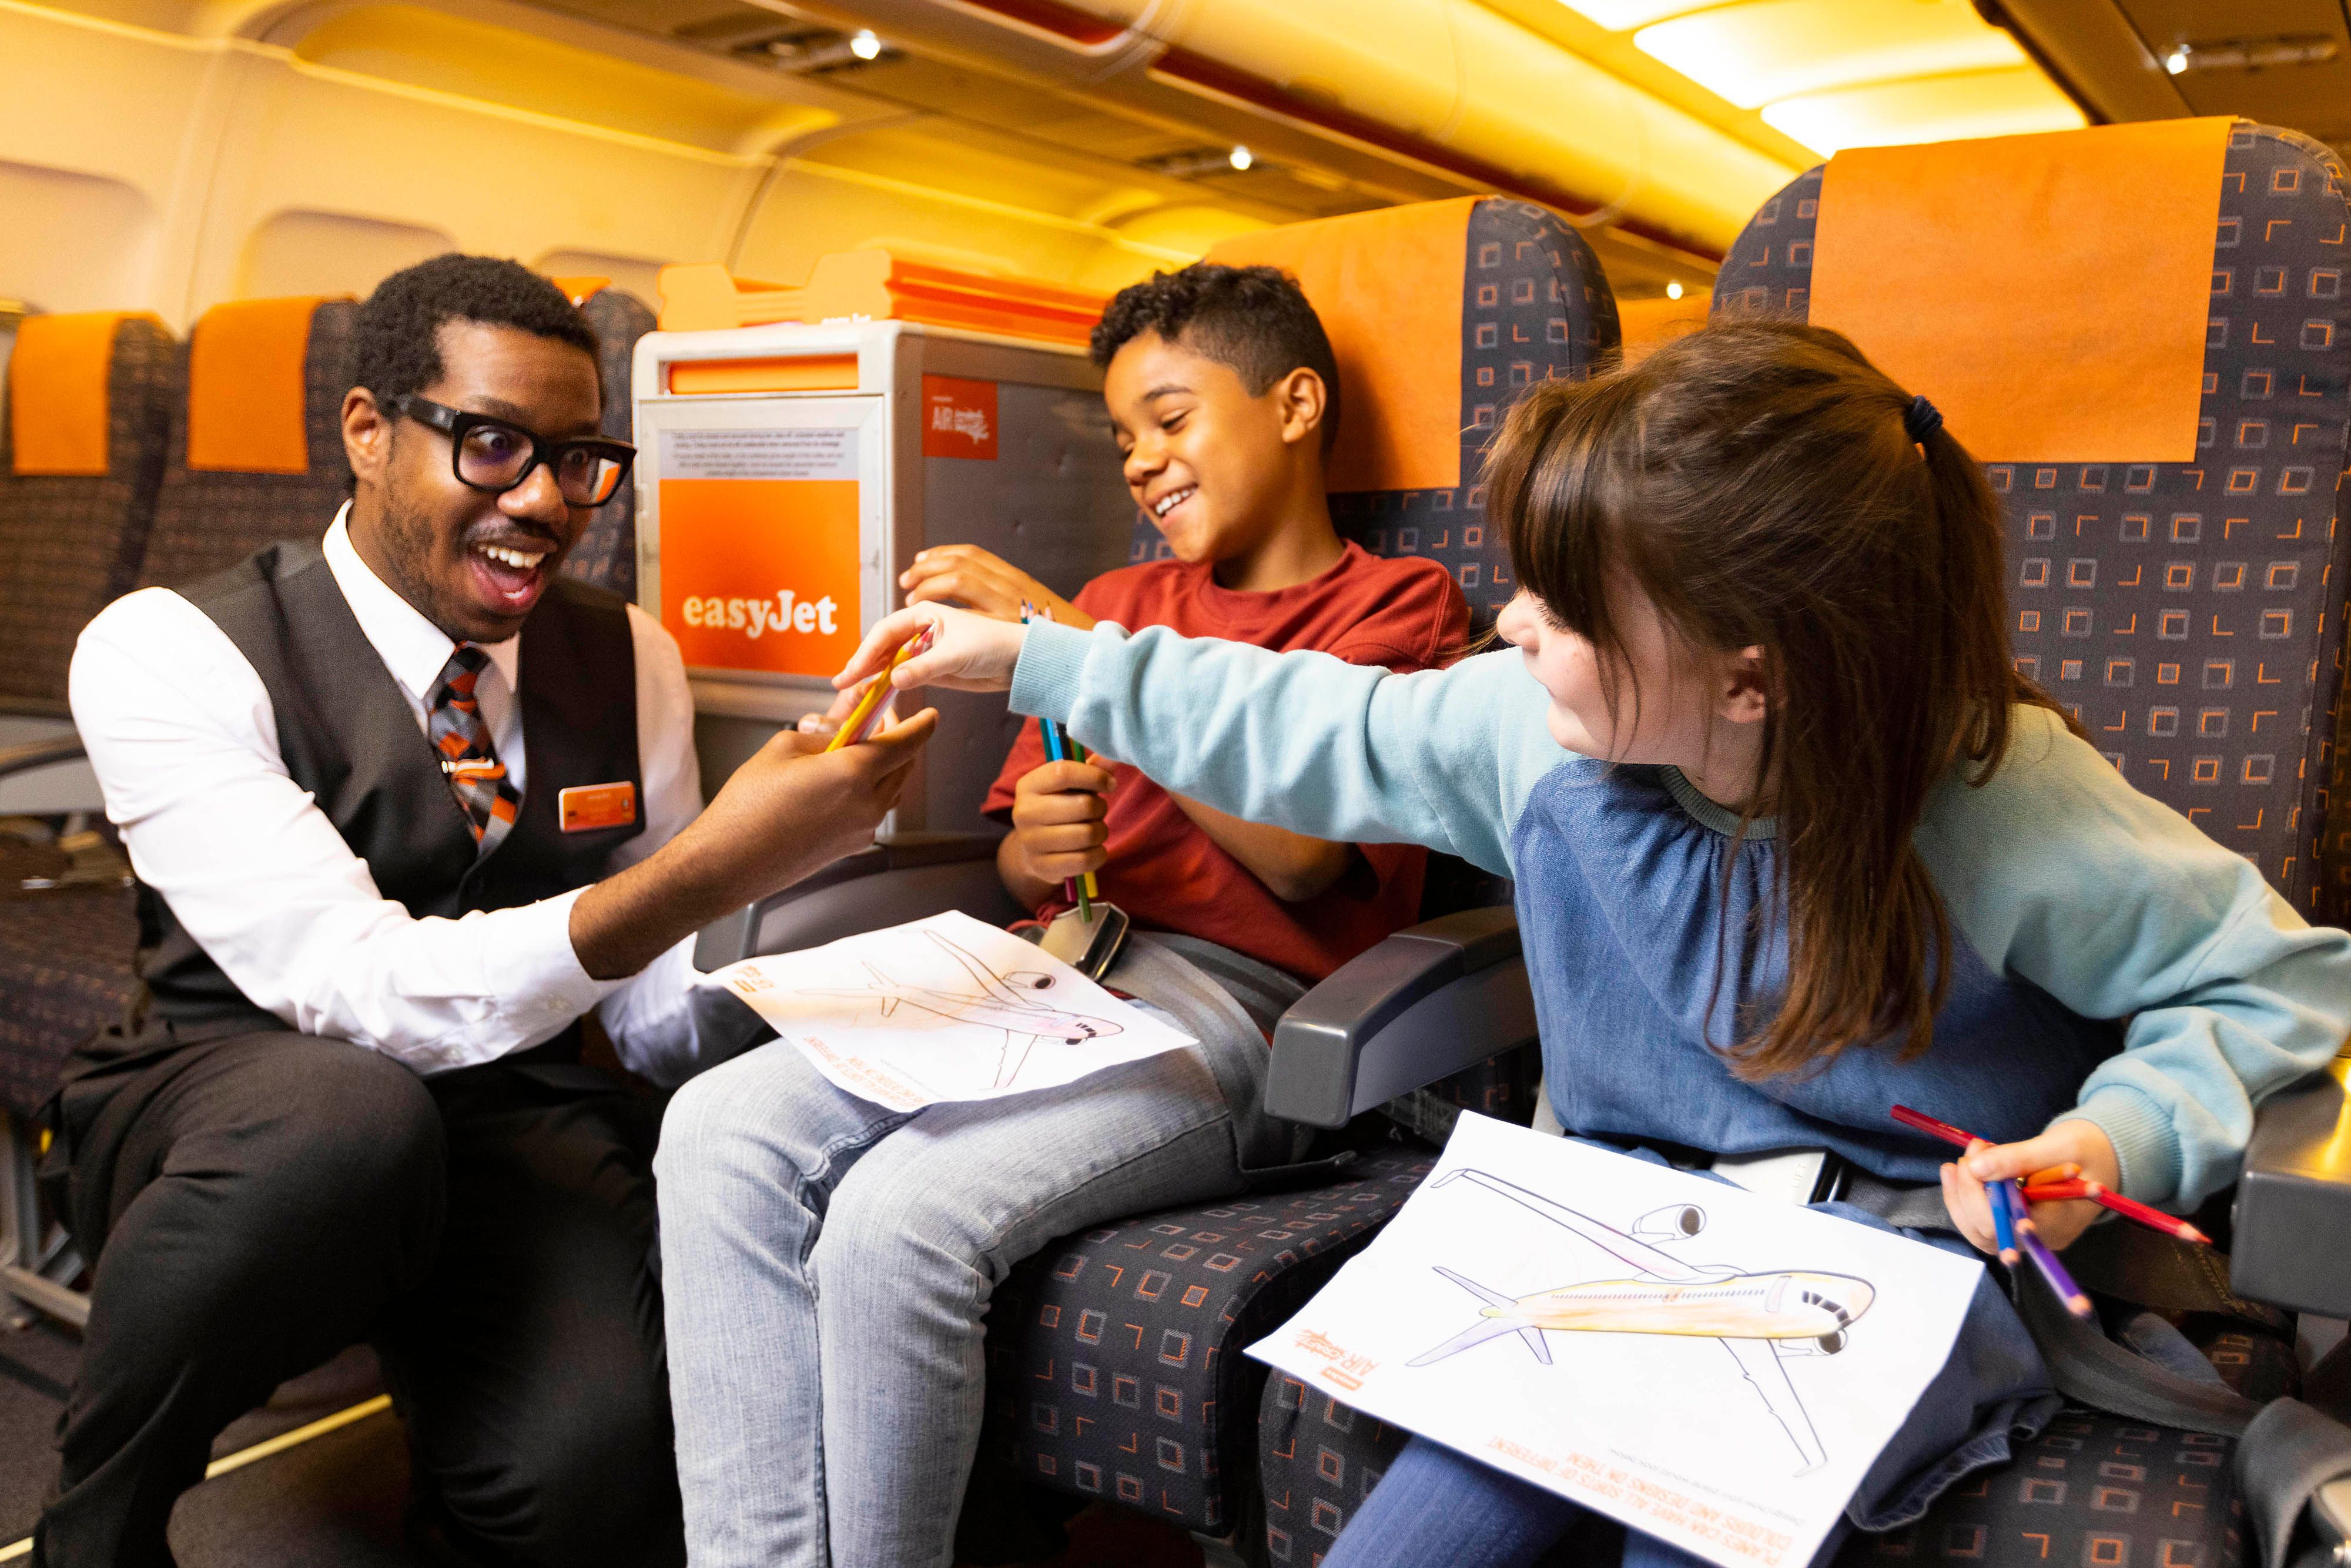 easyjet aircraft cabin crew service in cabin